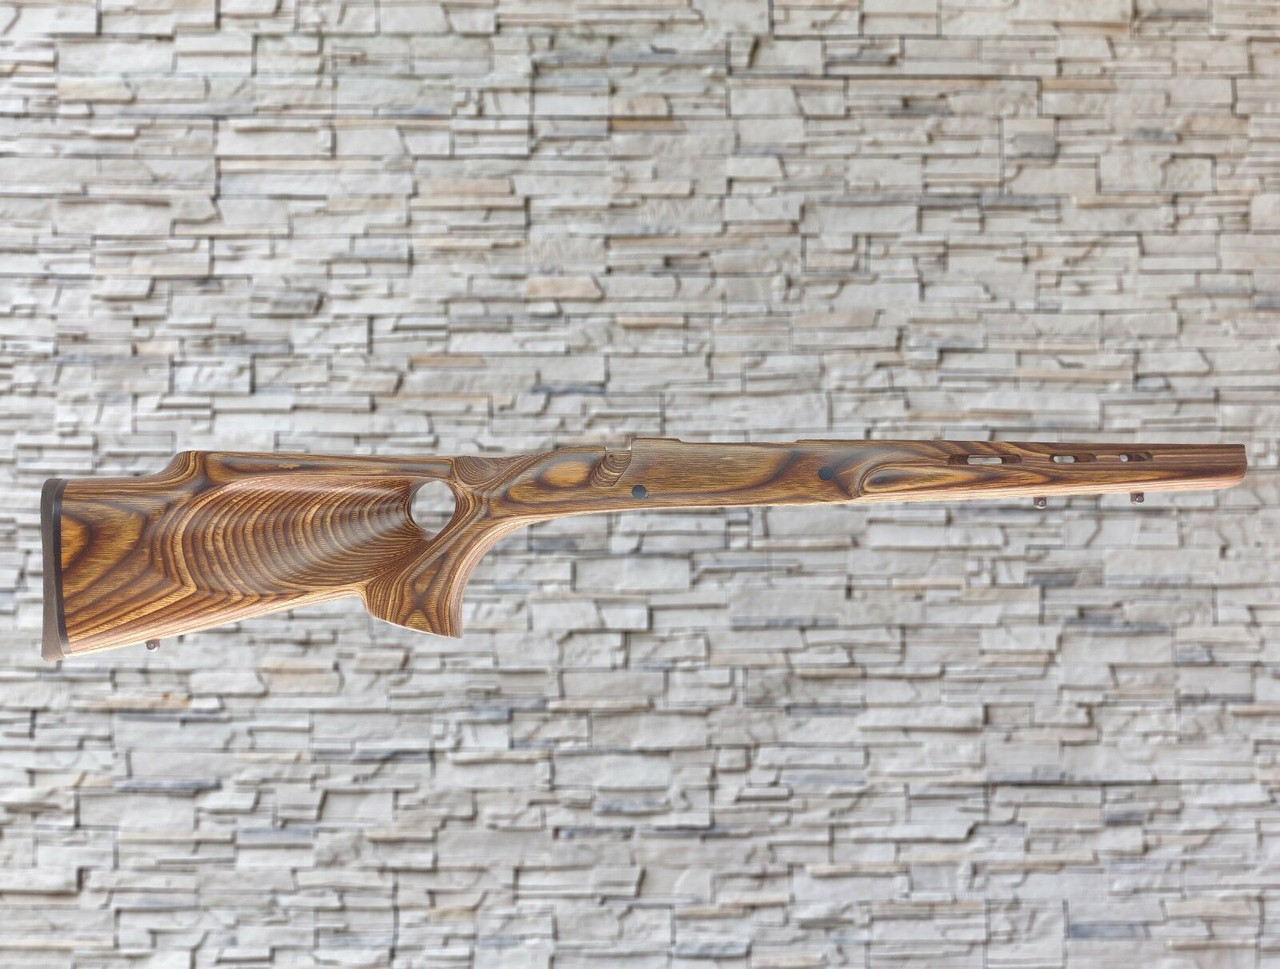 Boyds Featherweight Nutmeg Stock Ruger 77 Long Action Rifle